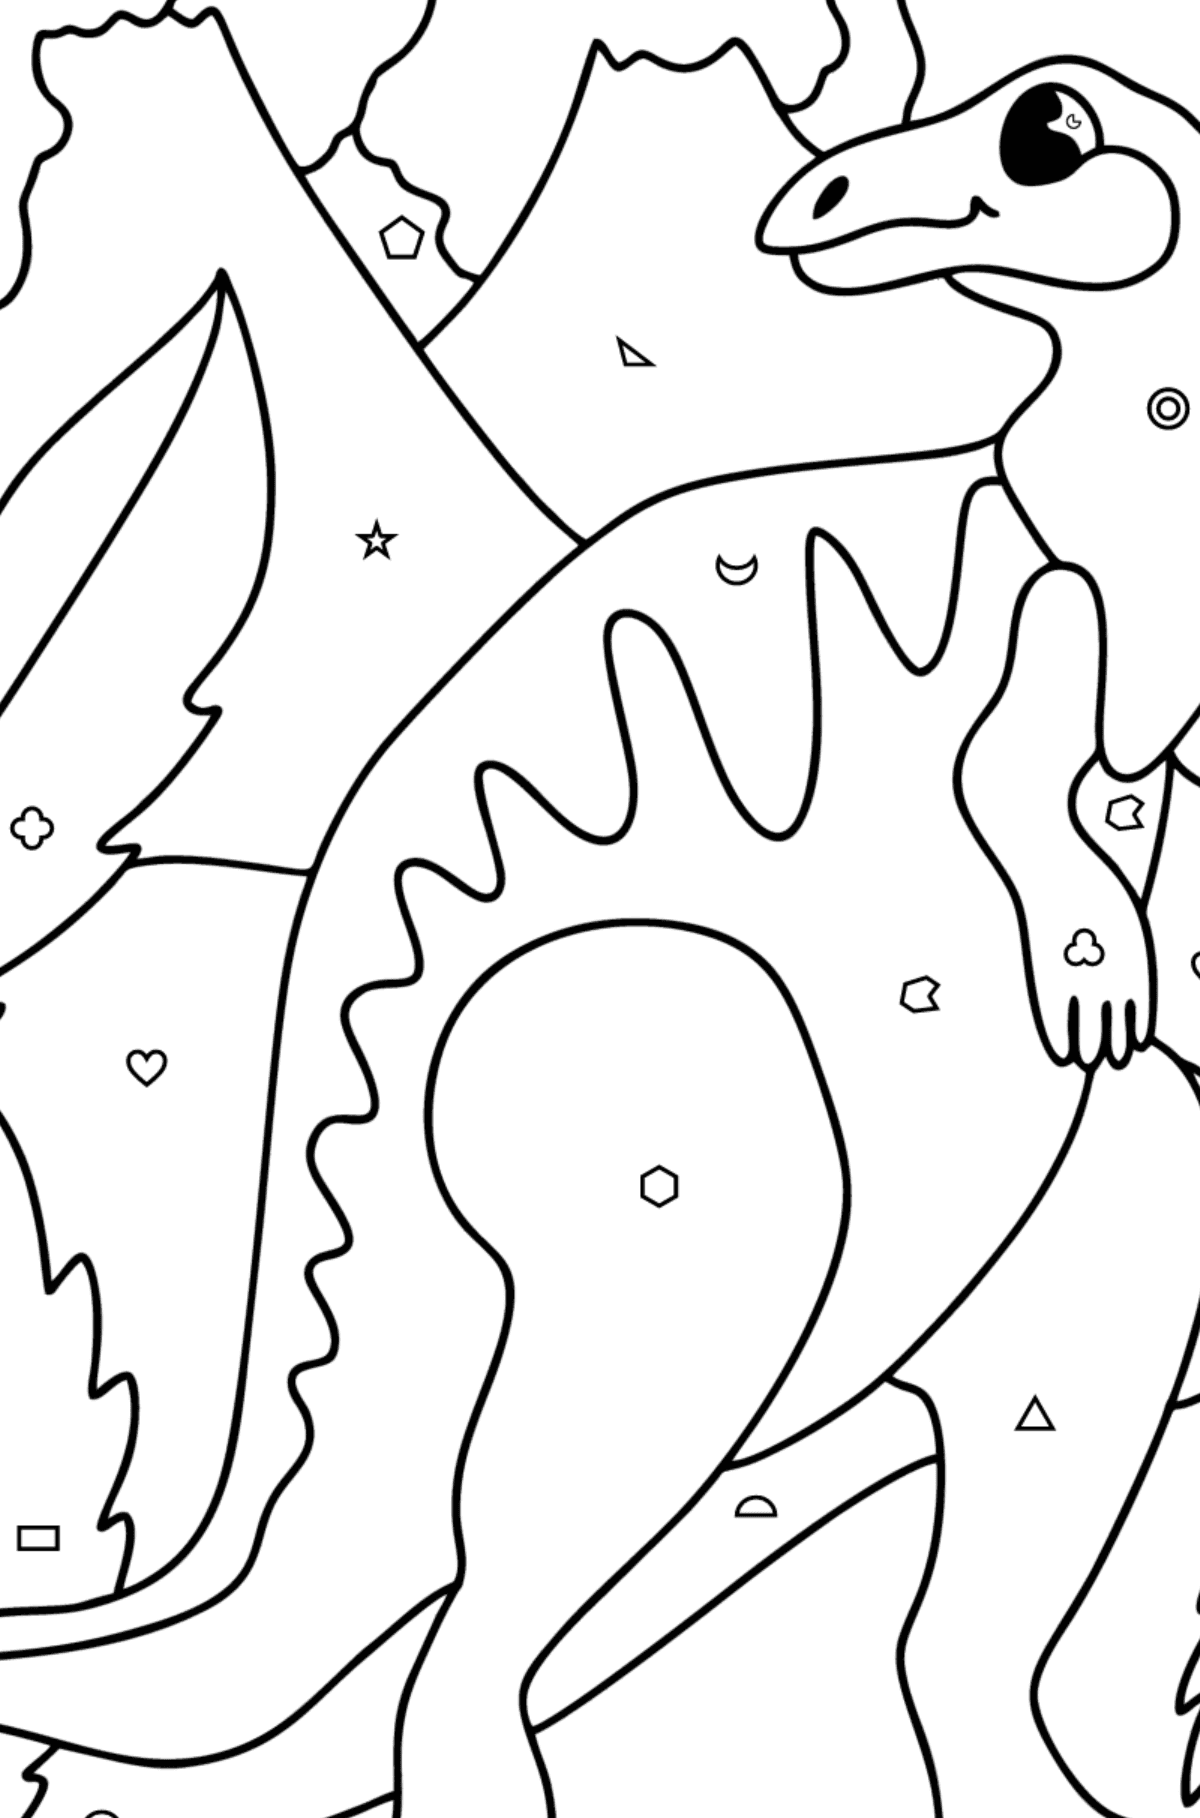 Hadrosaur coloring page - Coloring by Geometric Shapes for Kids